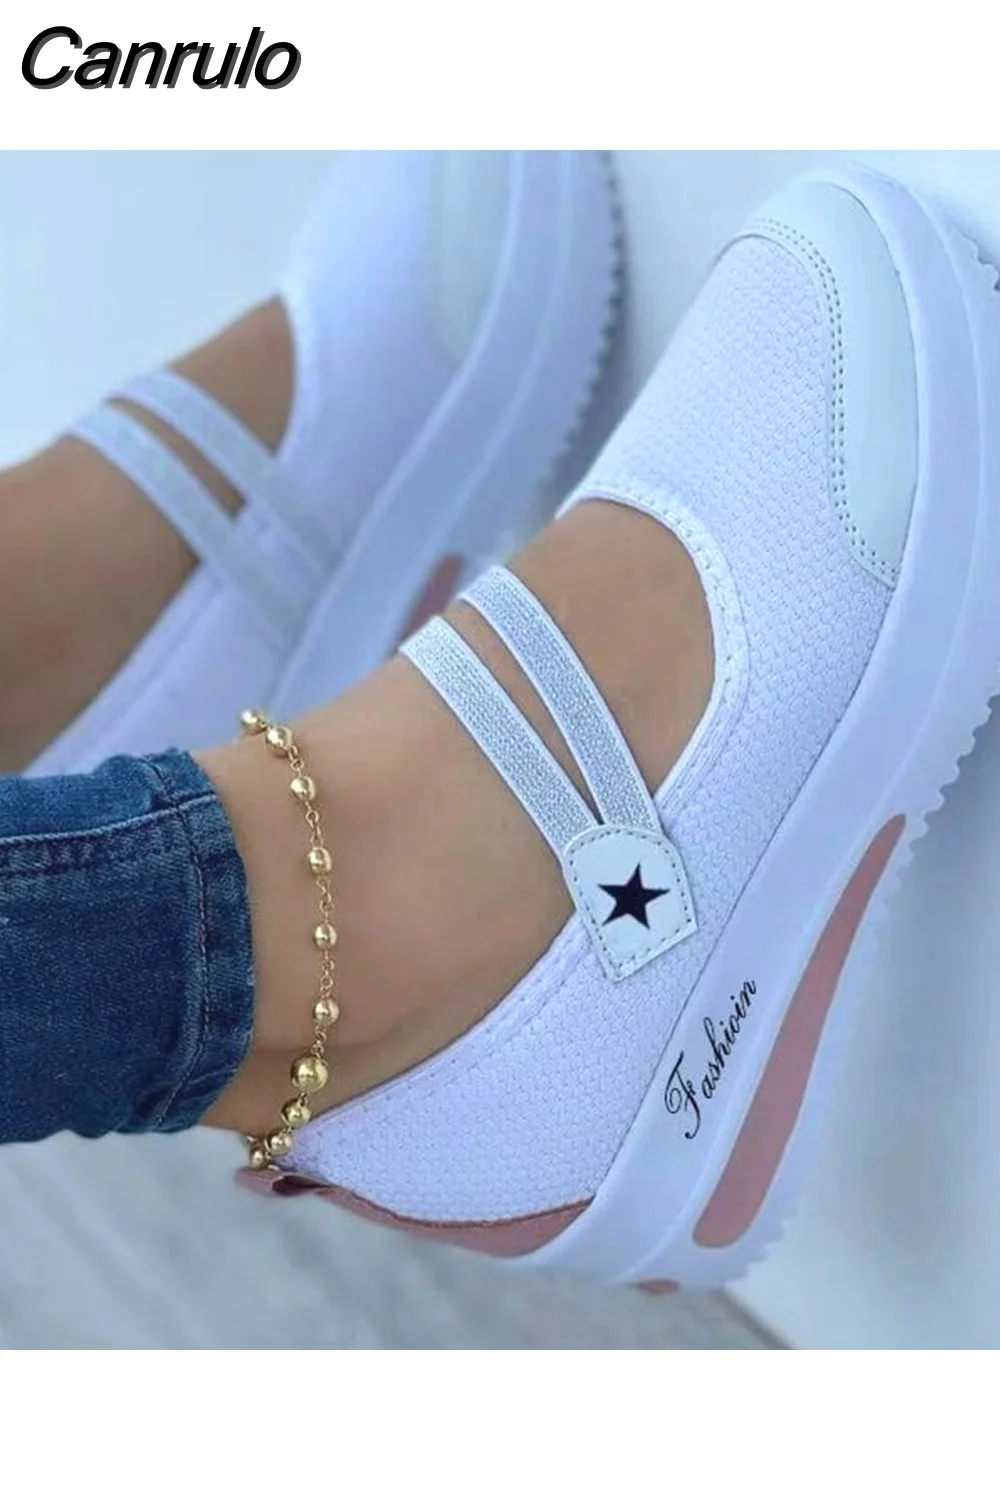 Canrulo Female Sneakers Woman Tennis Shoes Canvas Female Casual Shoe Ladies Sport Platform Sneaker White 2023 Mesh Breathable